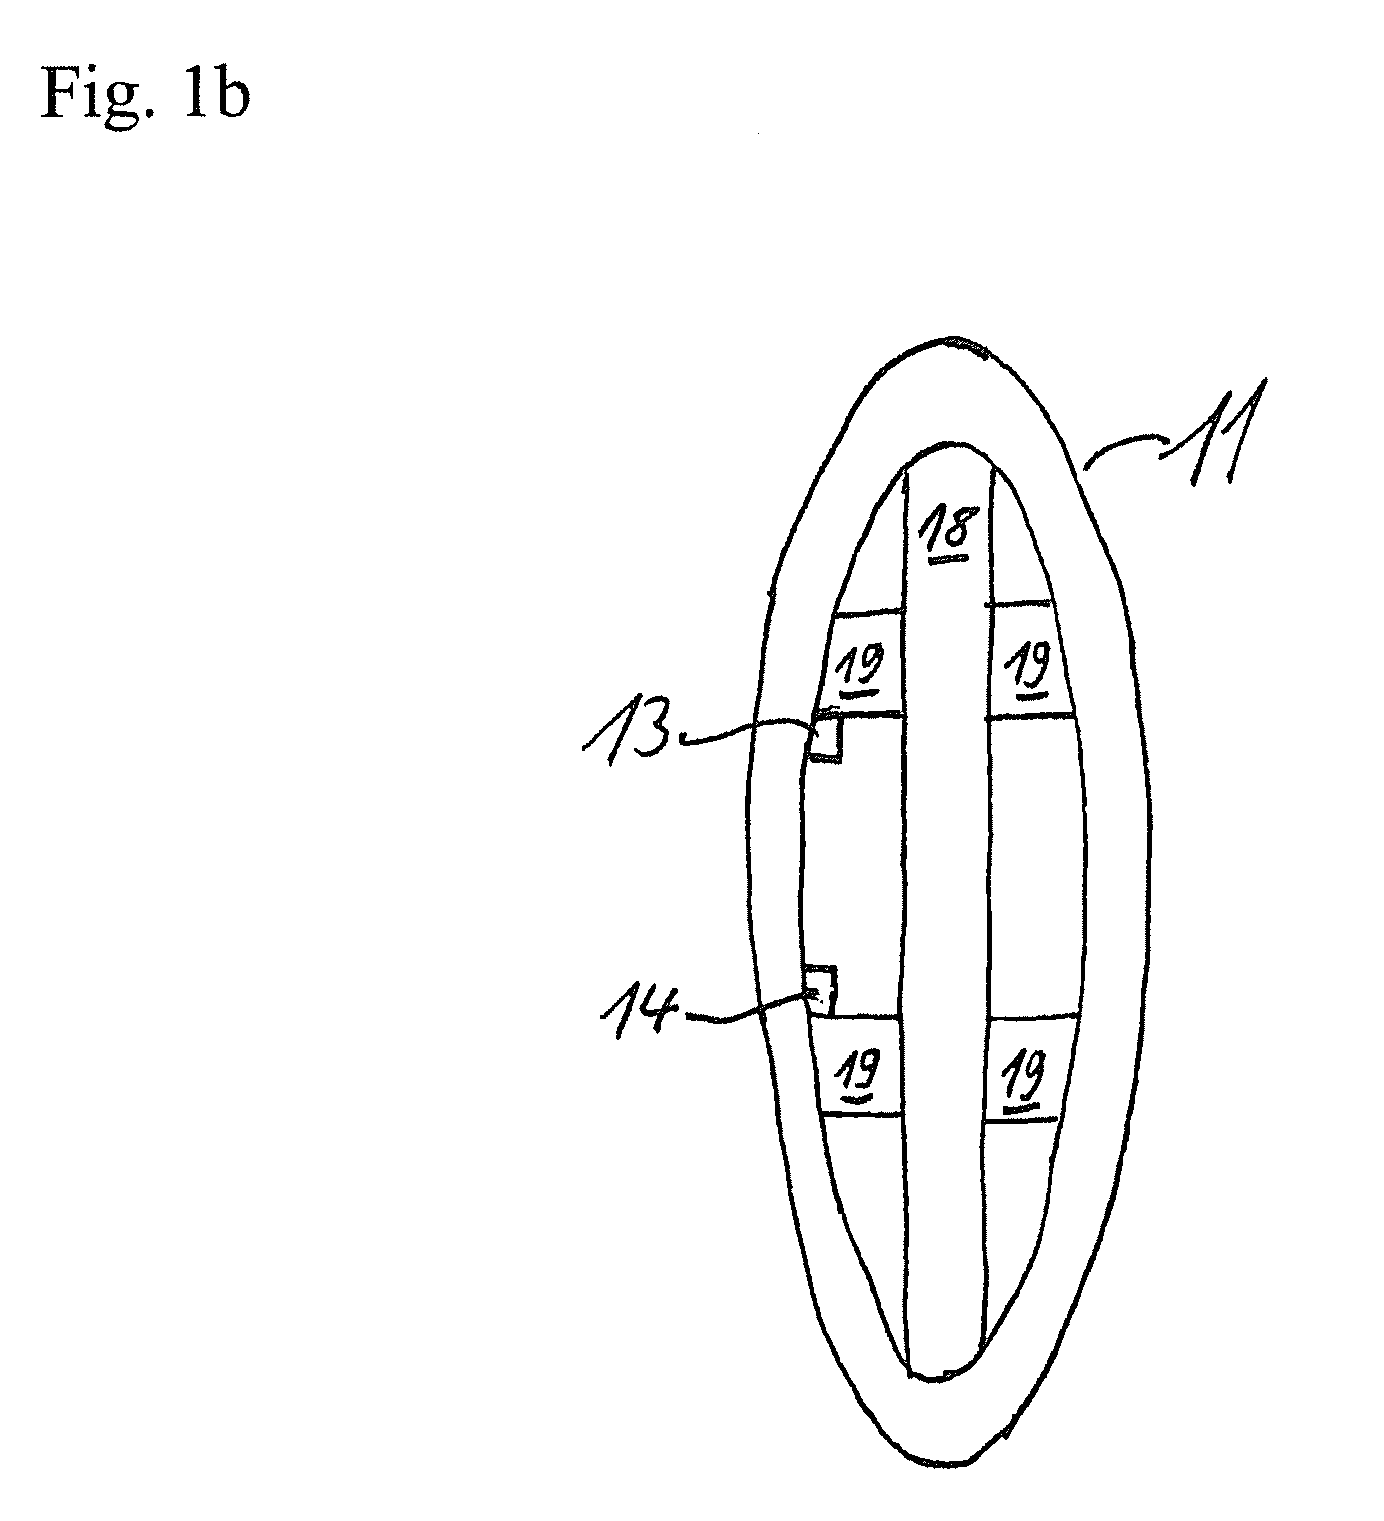 Method for oscillation measurment on rotor blades or wind power installations